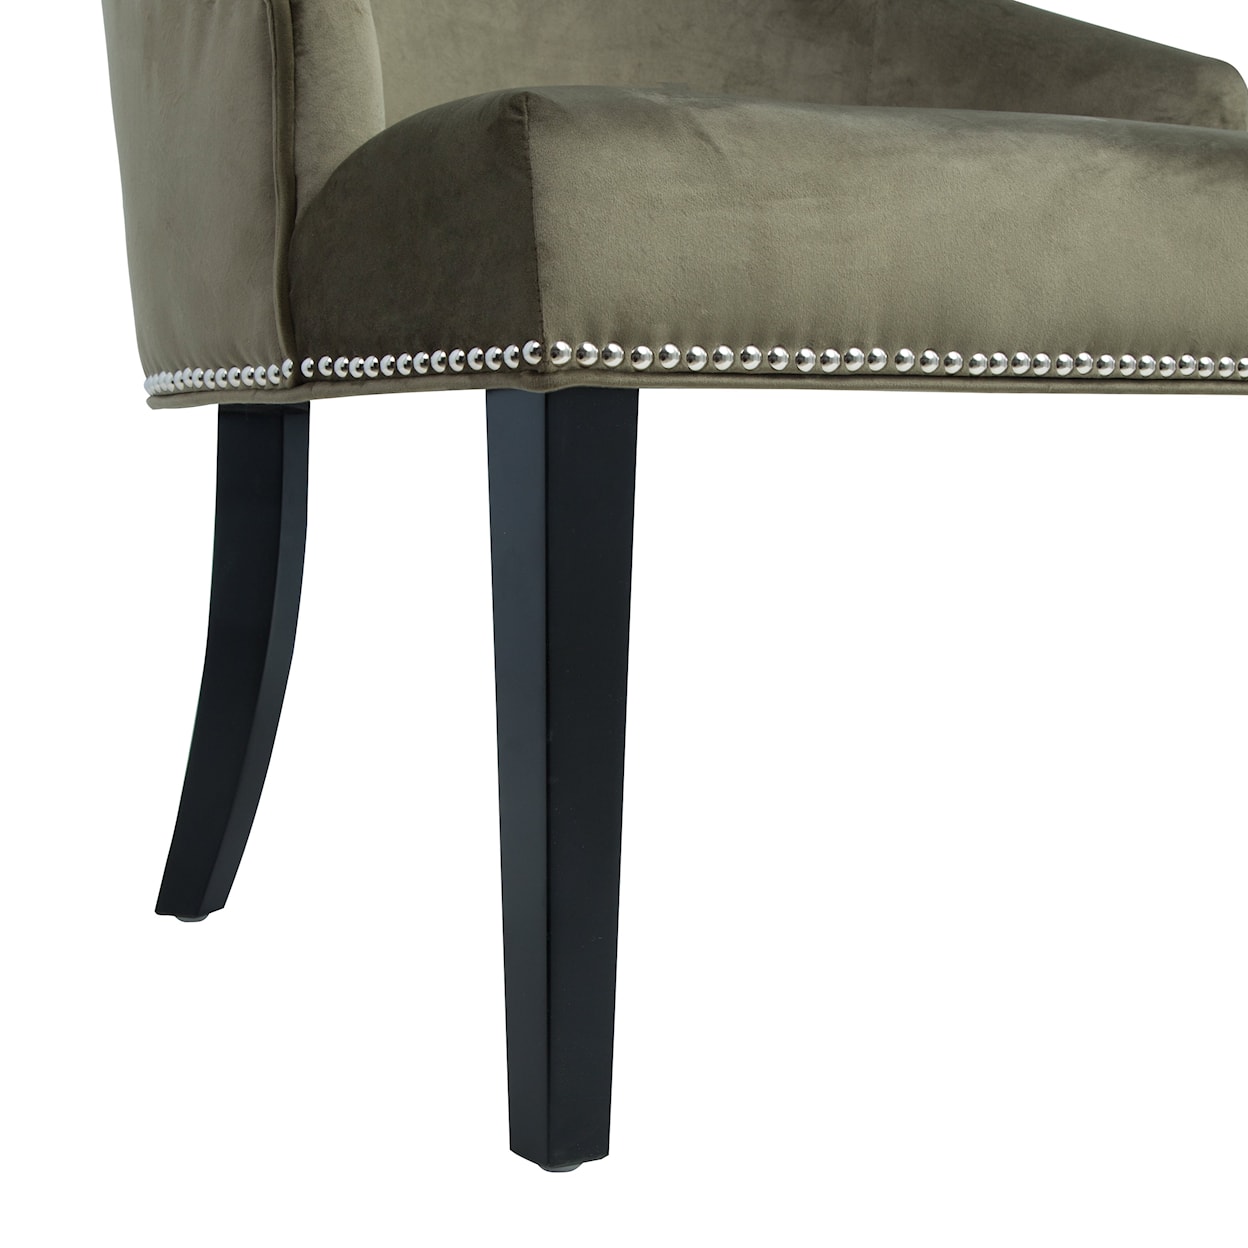 Accentrics Home Accent Seating Dining Chair Bella Moss